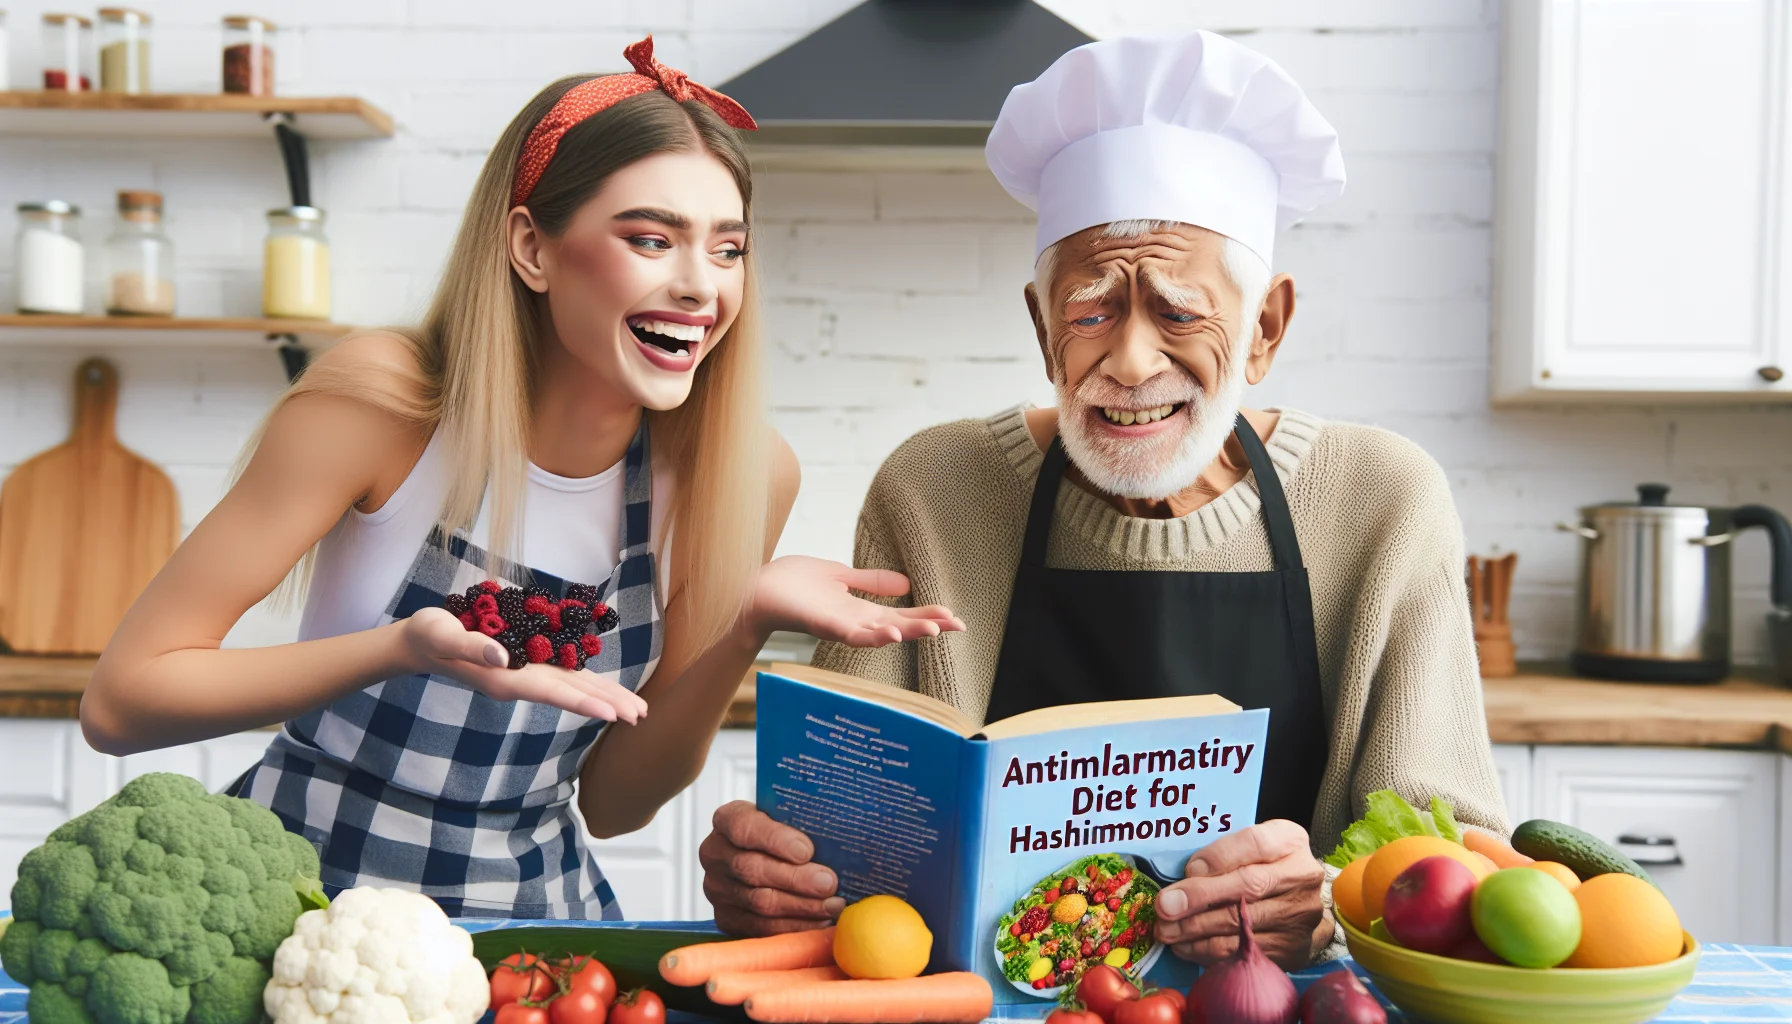 Create an amusing and realistic image featuring an elderly Caucasian man and a Middle-Eastern woman sitting together in a brightly lit kitchen. The man is holding up a recipe book titled 'Anti-Inflammatory Diet for Hashimoto's', looking puzzled, while the woman is laughing heartily, pointing at an assortment of colorful vegetables and fruits laid on the table which are indicative of a healthy diet. Both are wearing aprons and chef hats, adding an element of whimsy to the scene.